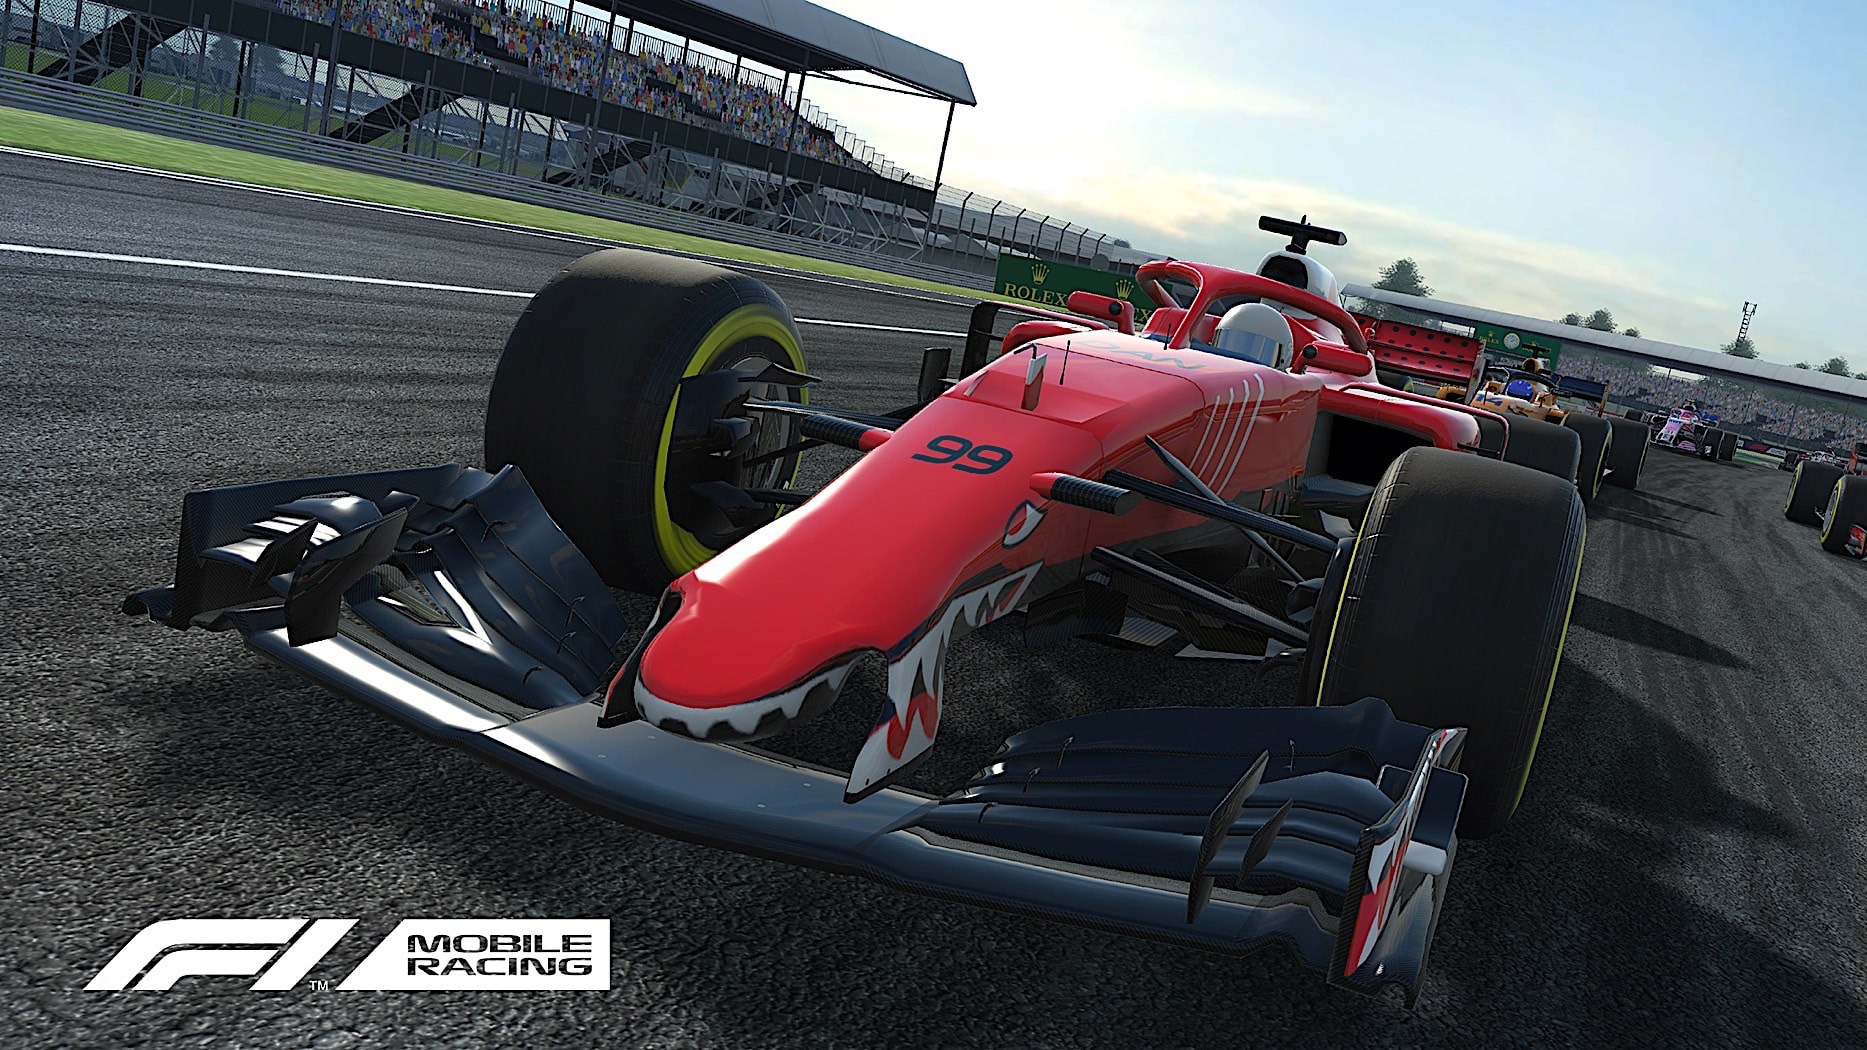 Free-to-Play F1 Mobile Racing Goes Live on The App Store